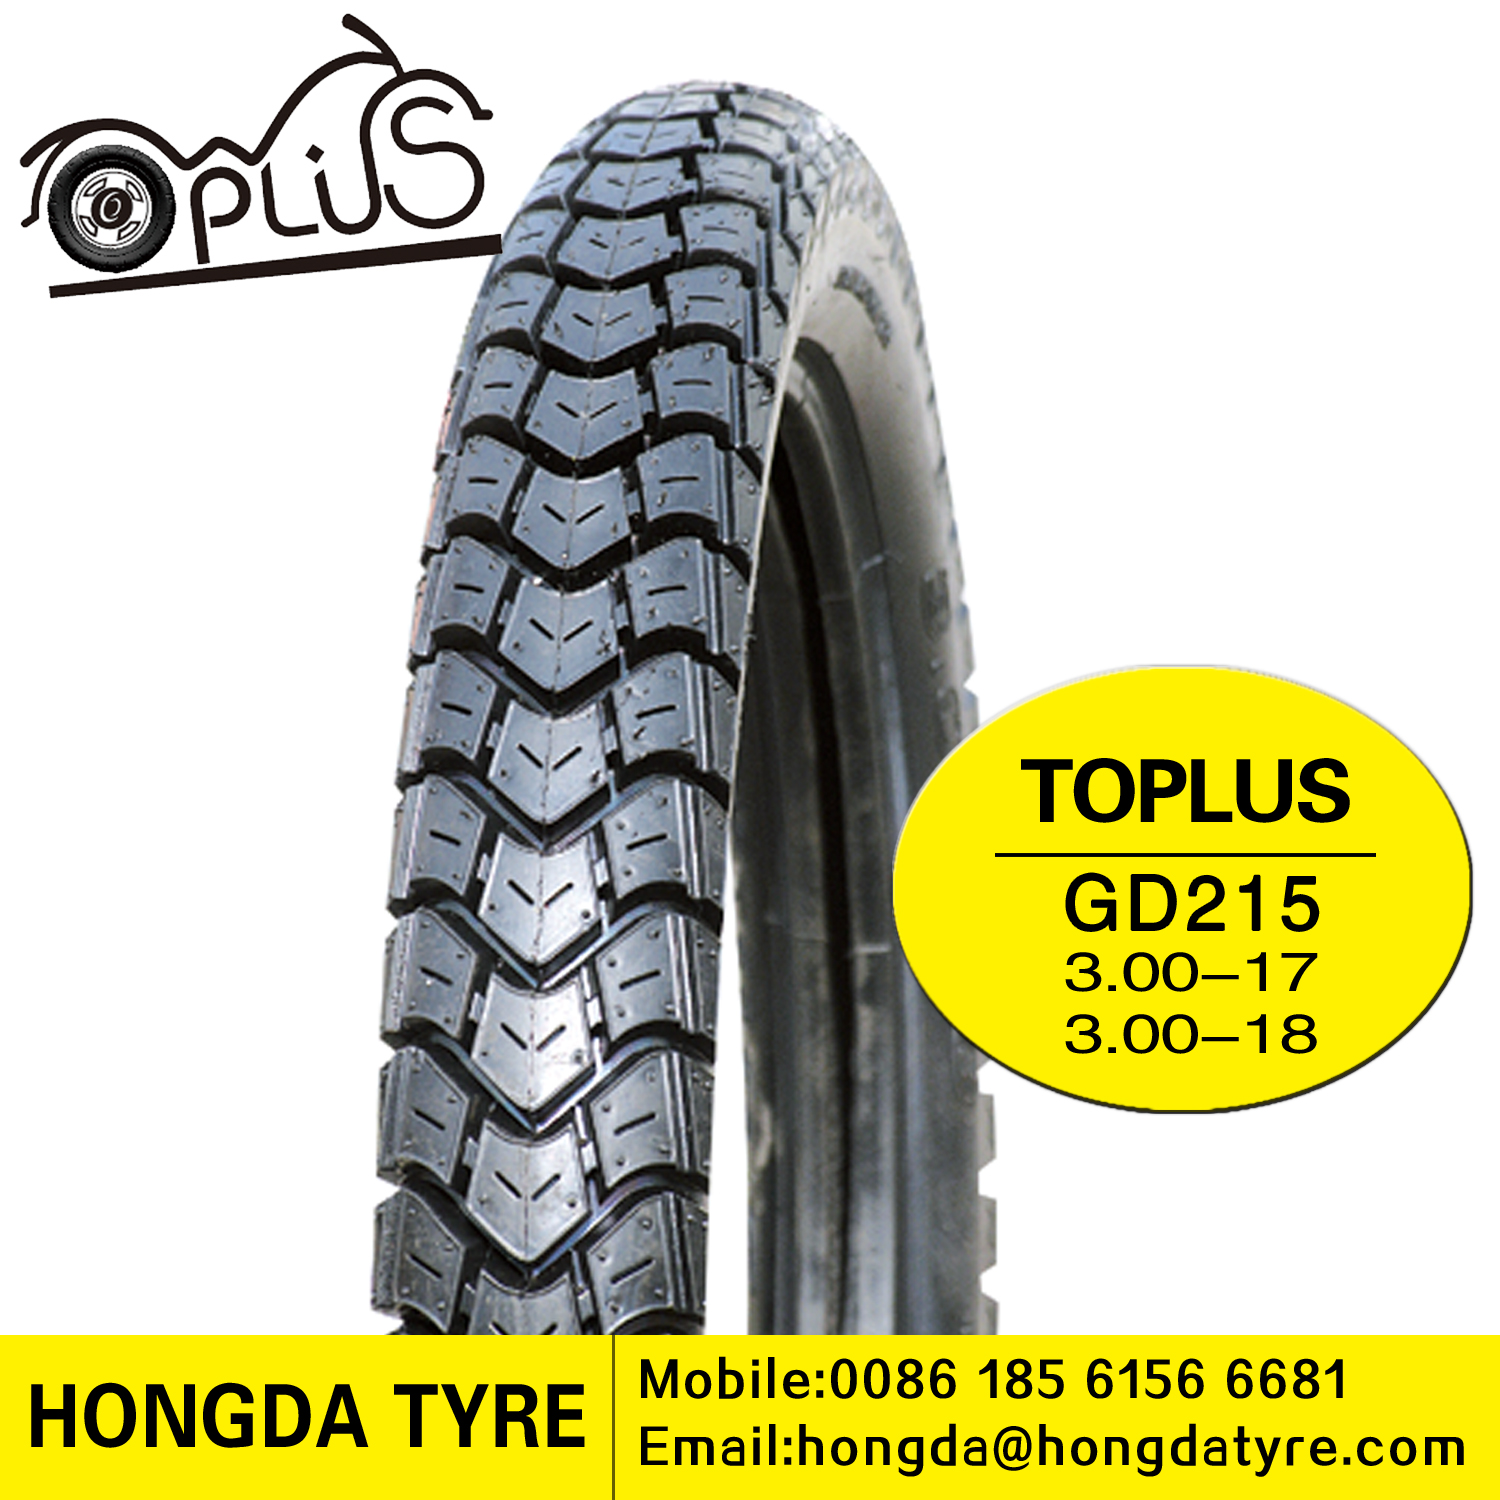 Motorcycle tyre GD215